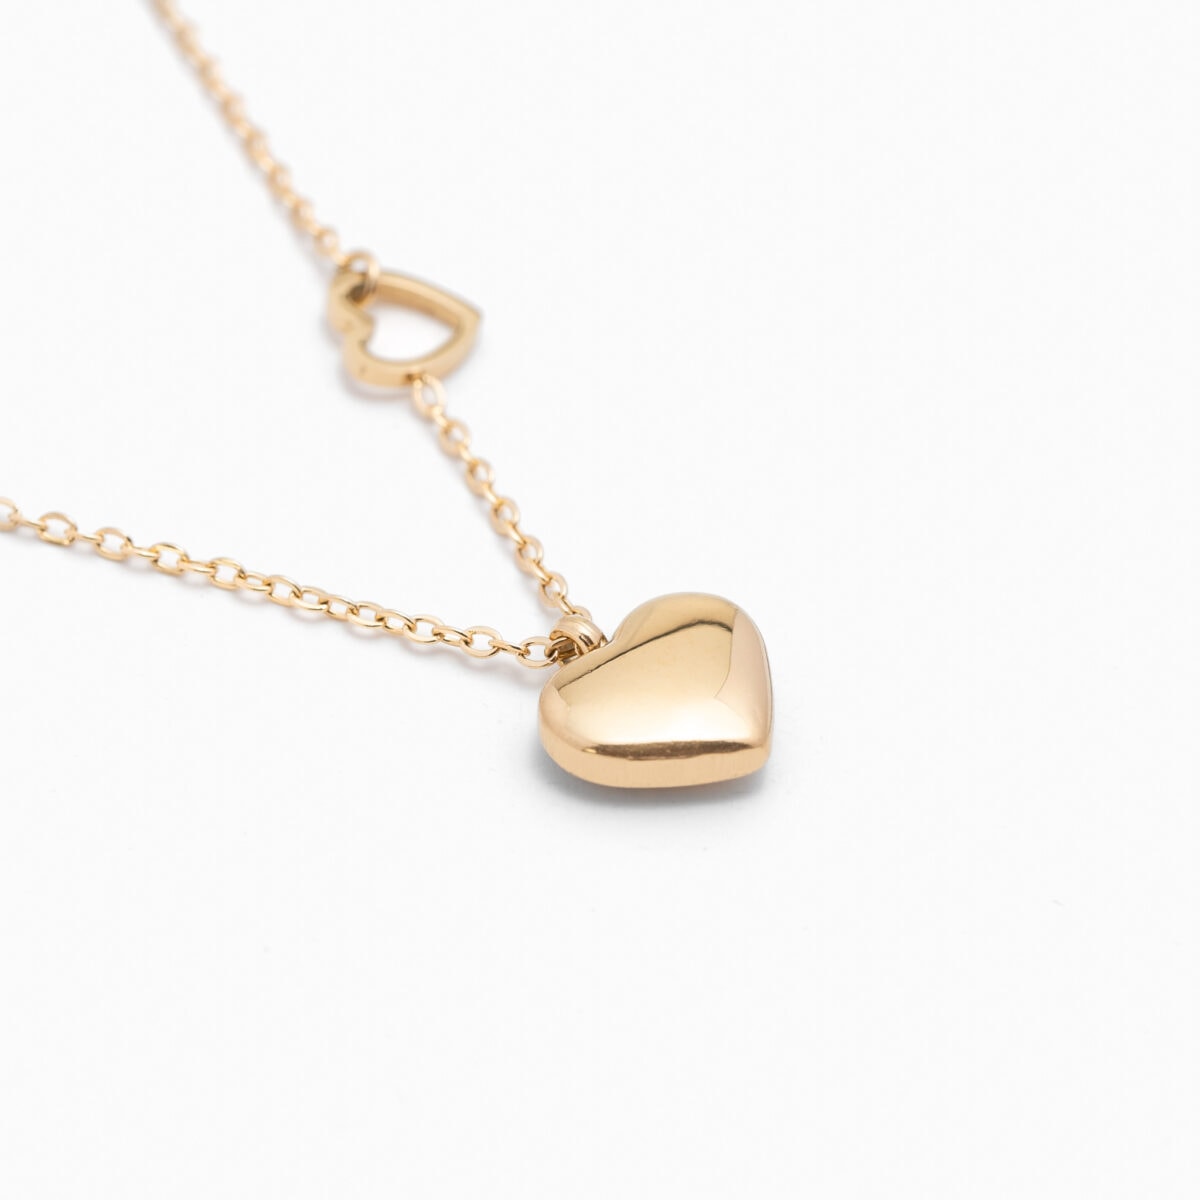 https://m.clubbella.co/product/bliss-duo-heart-necklace/ Bliss Duo heart necklace (1)